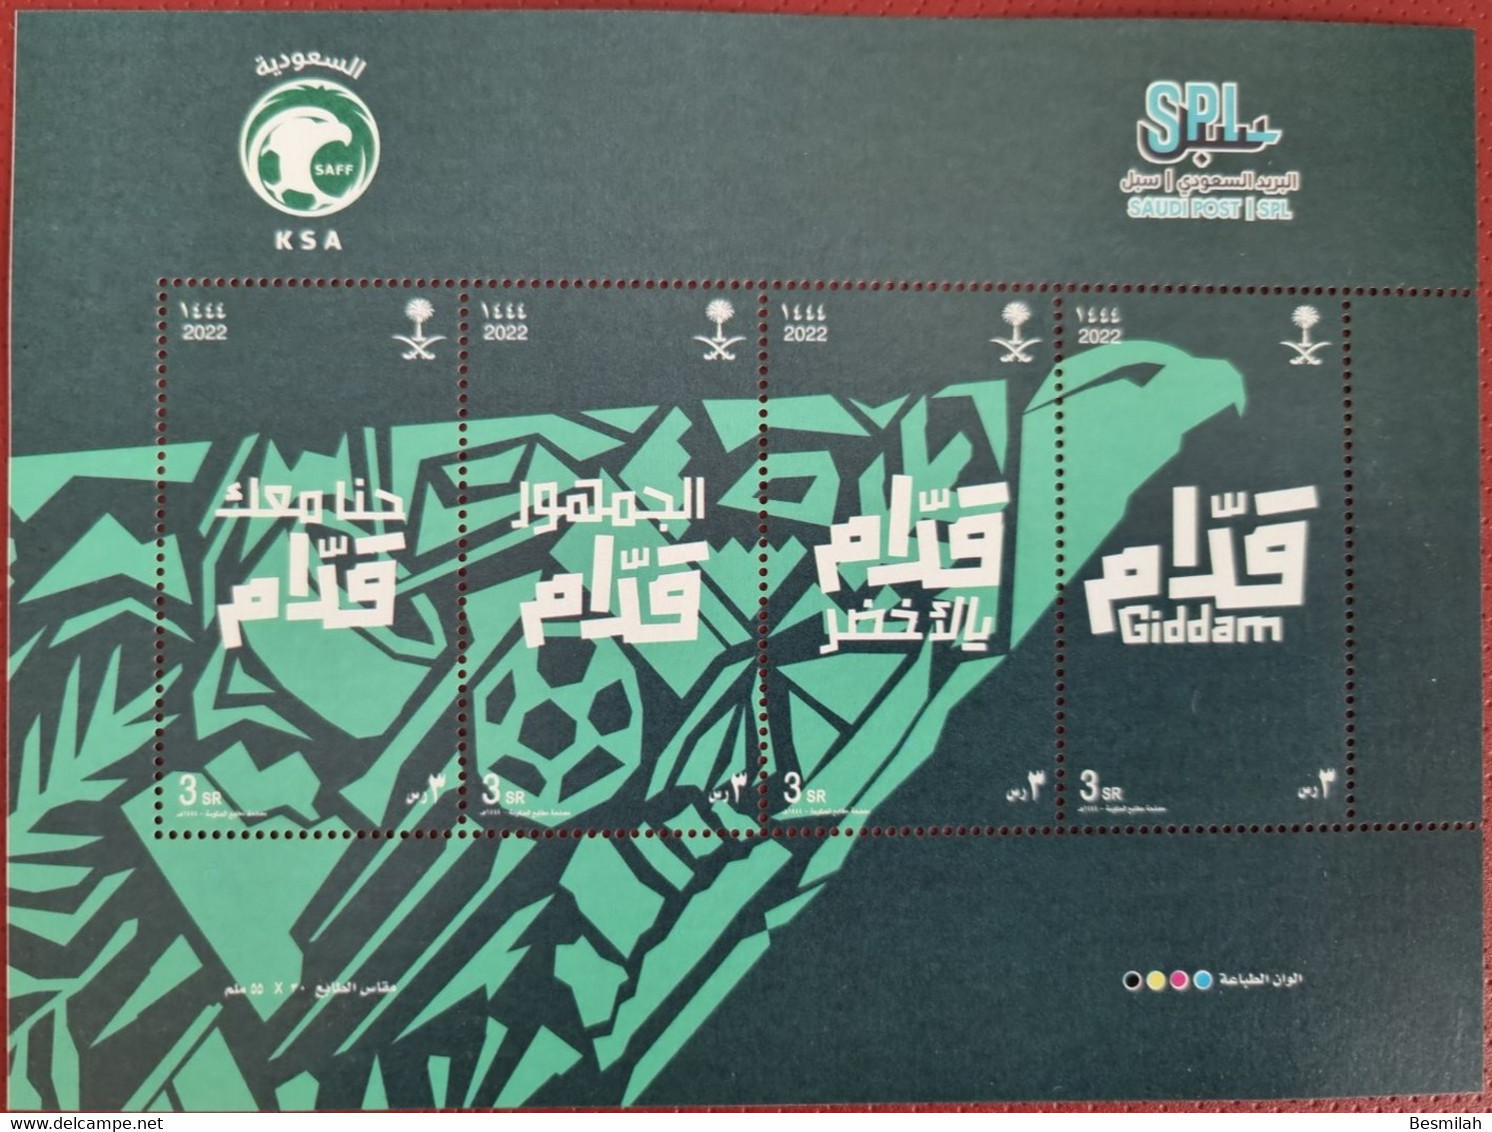 Saudi Arabia Stamp Giddam For Fifa 2022 (1444 Hijry) 8 Pieces Of 3 Riyals With 2 First Day Version Covers + Card - Saudi Arabia